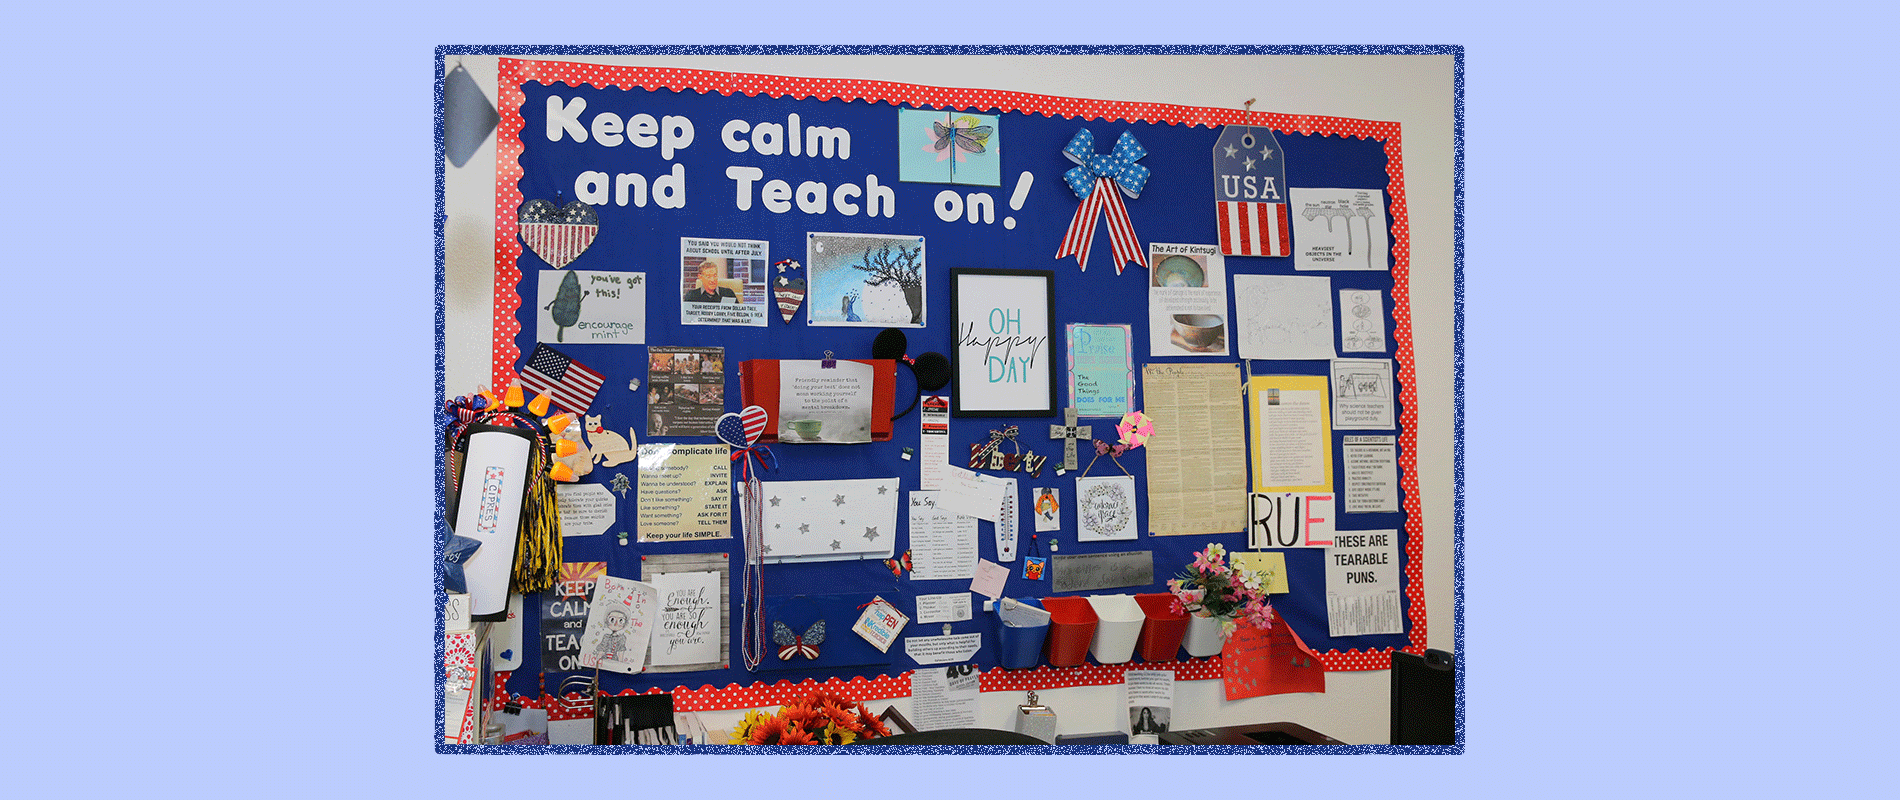 Bulletin Board with positive sayings for the start of the school year